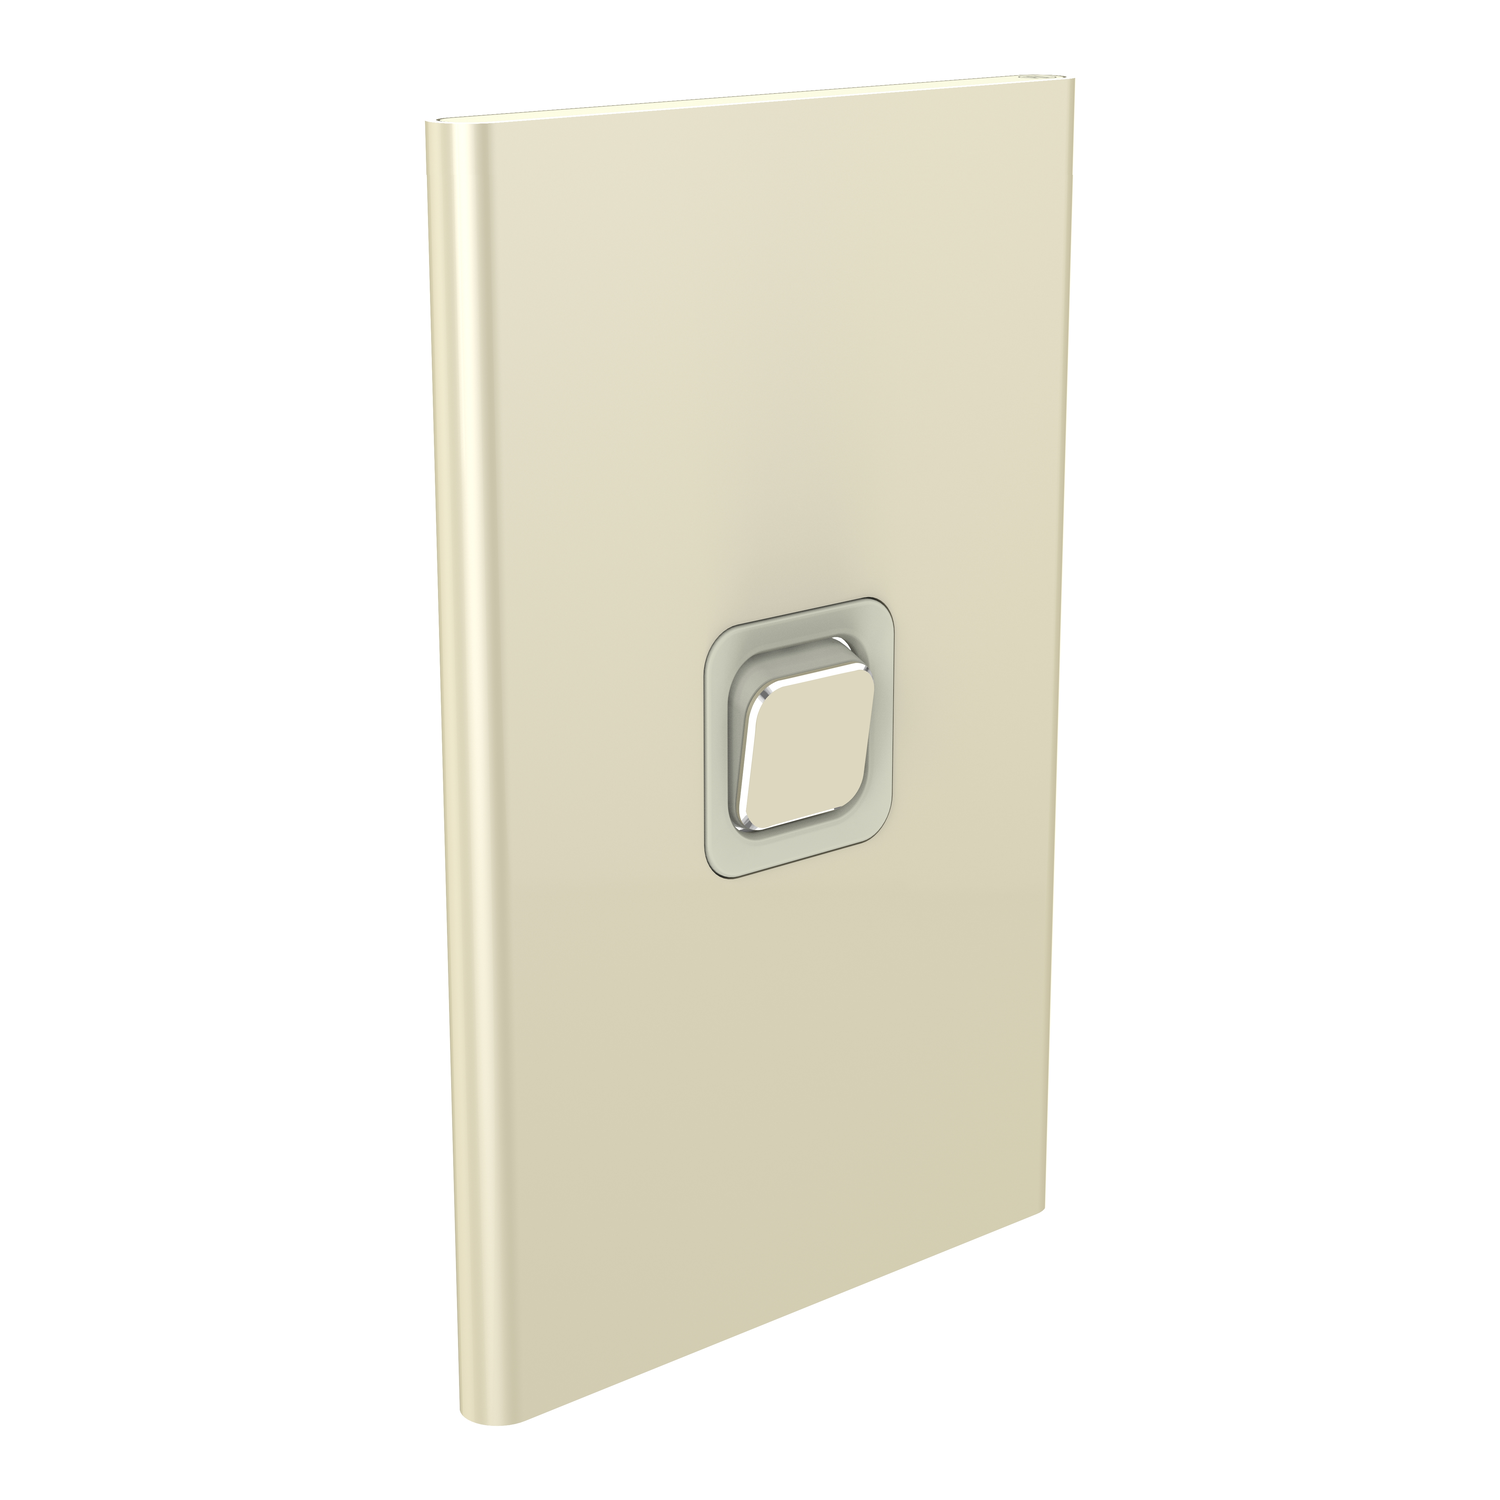 PDL Iconic Styl - Cover Plate Switch 1-Gang - Crowne